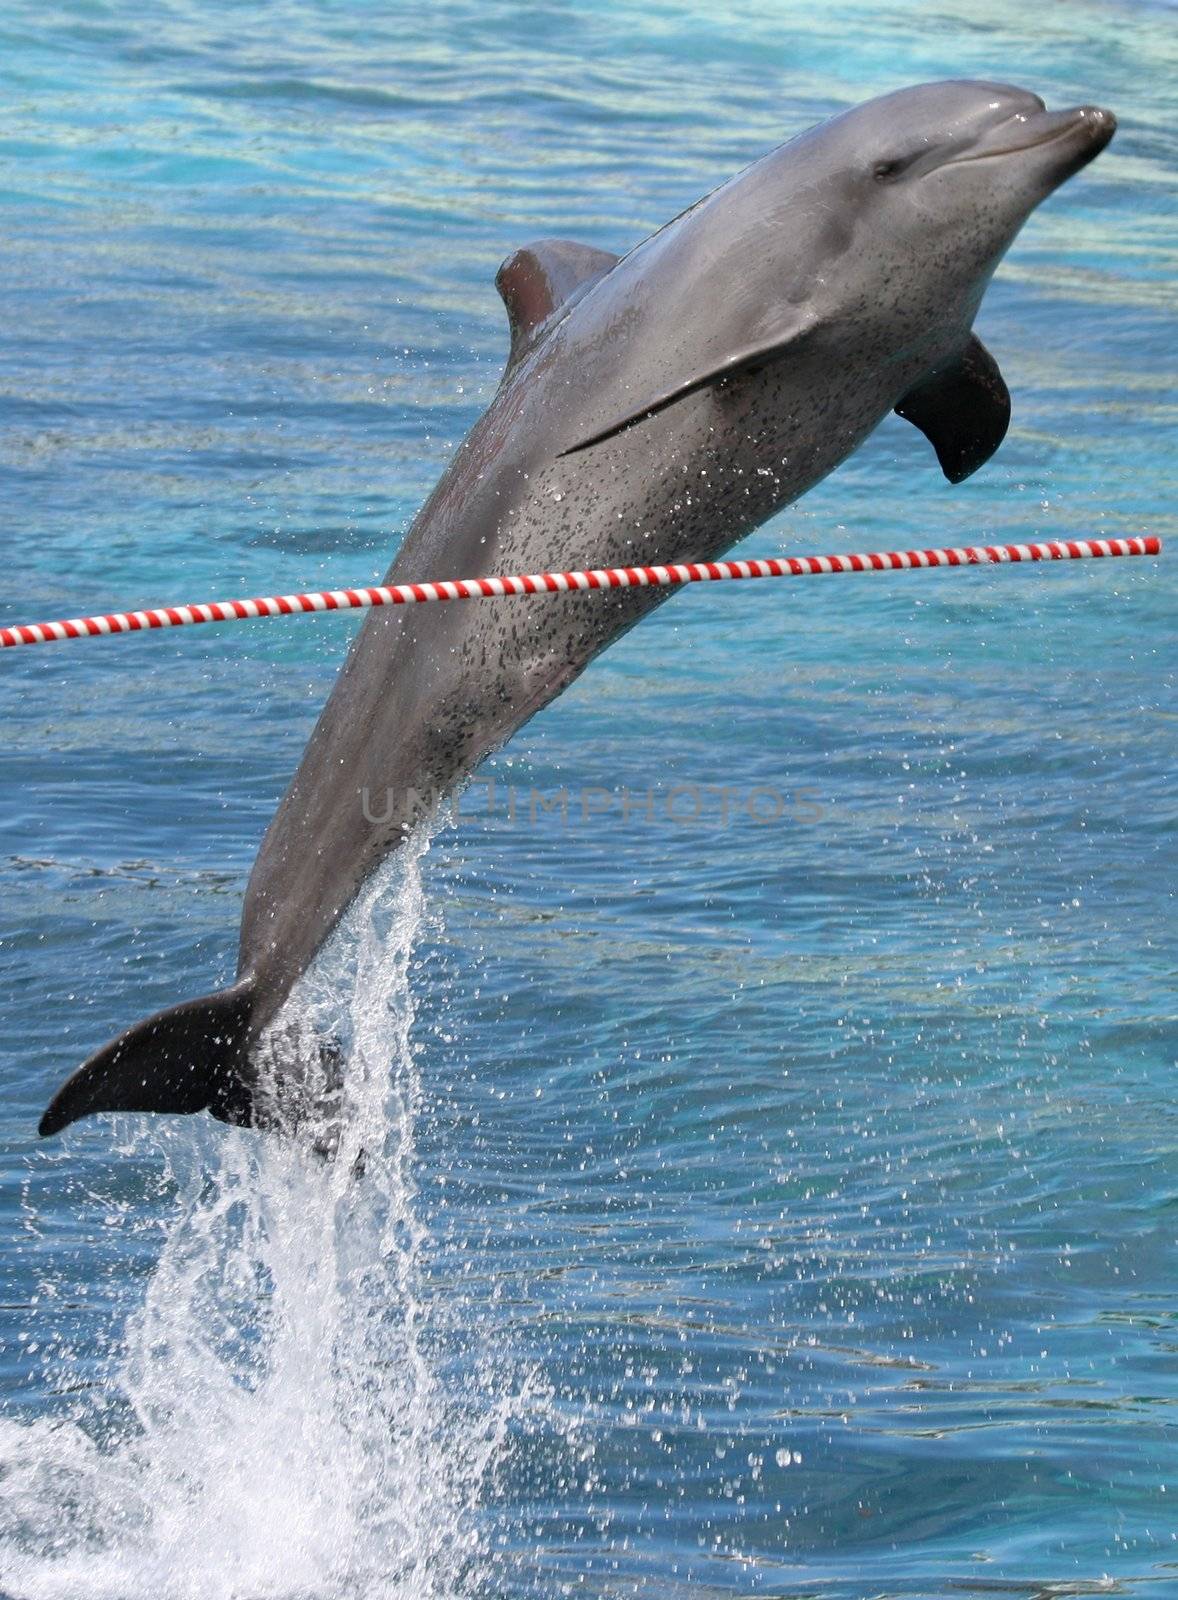 Bottlenose dolphin jumping over an outstretched pole